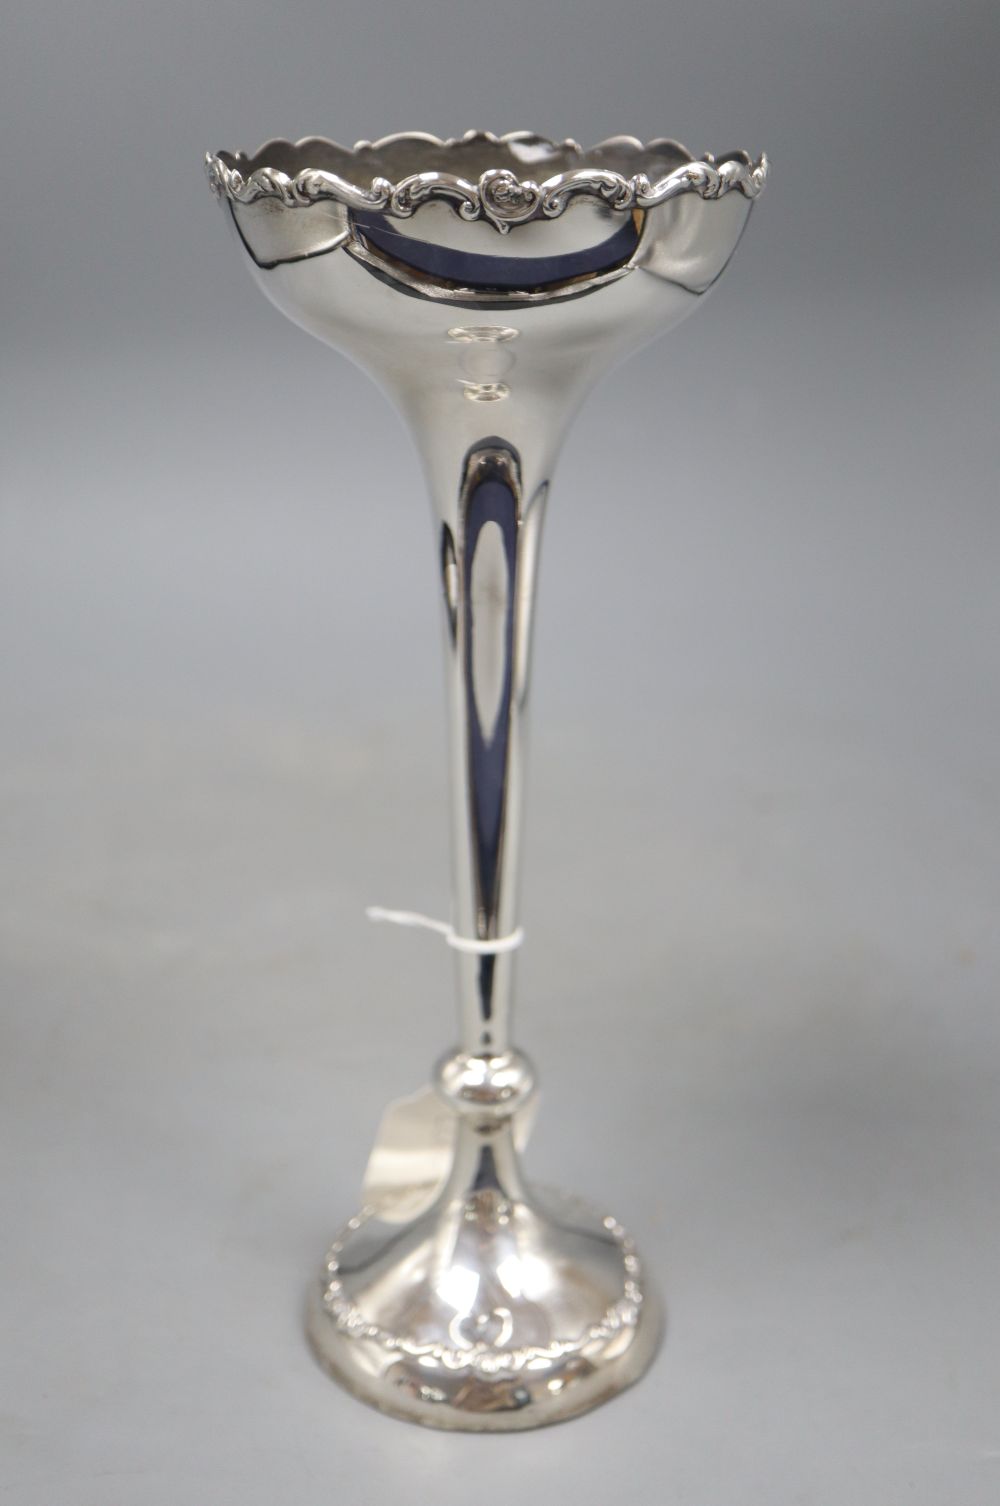 An Edwardian large silver trumpet shaped posy vase, Horace Woodward & Co, London, 1902, height 25.2cm, weighted.